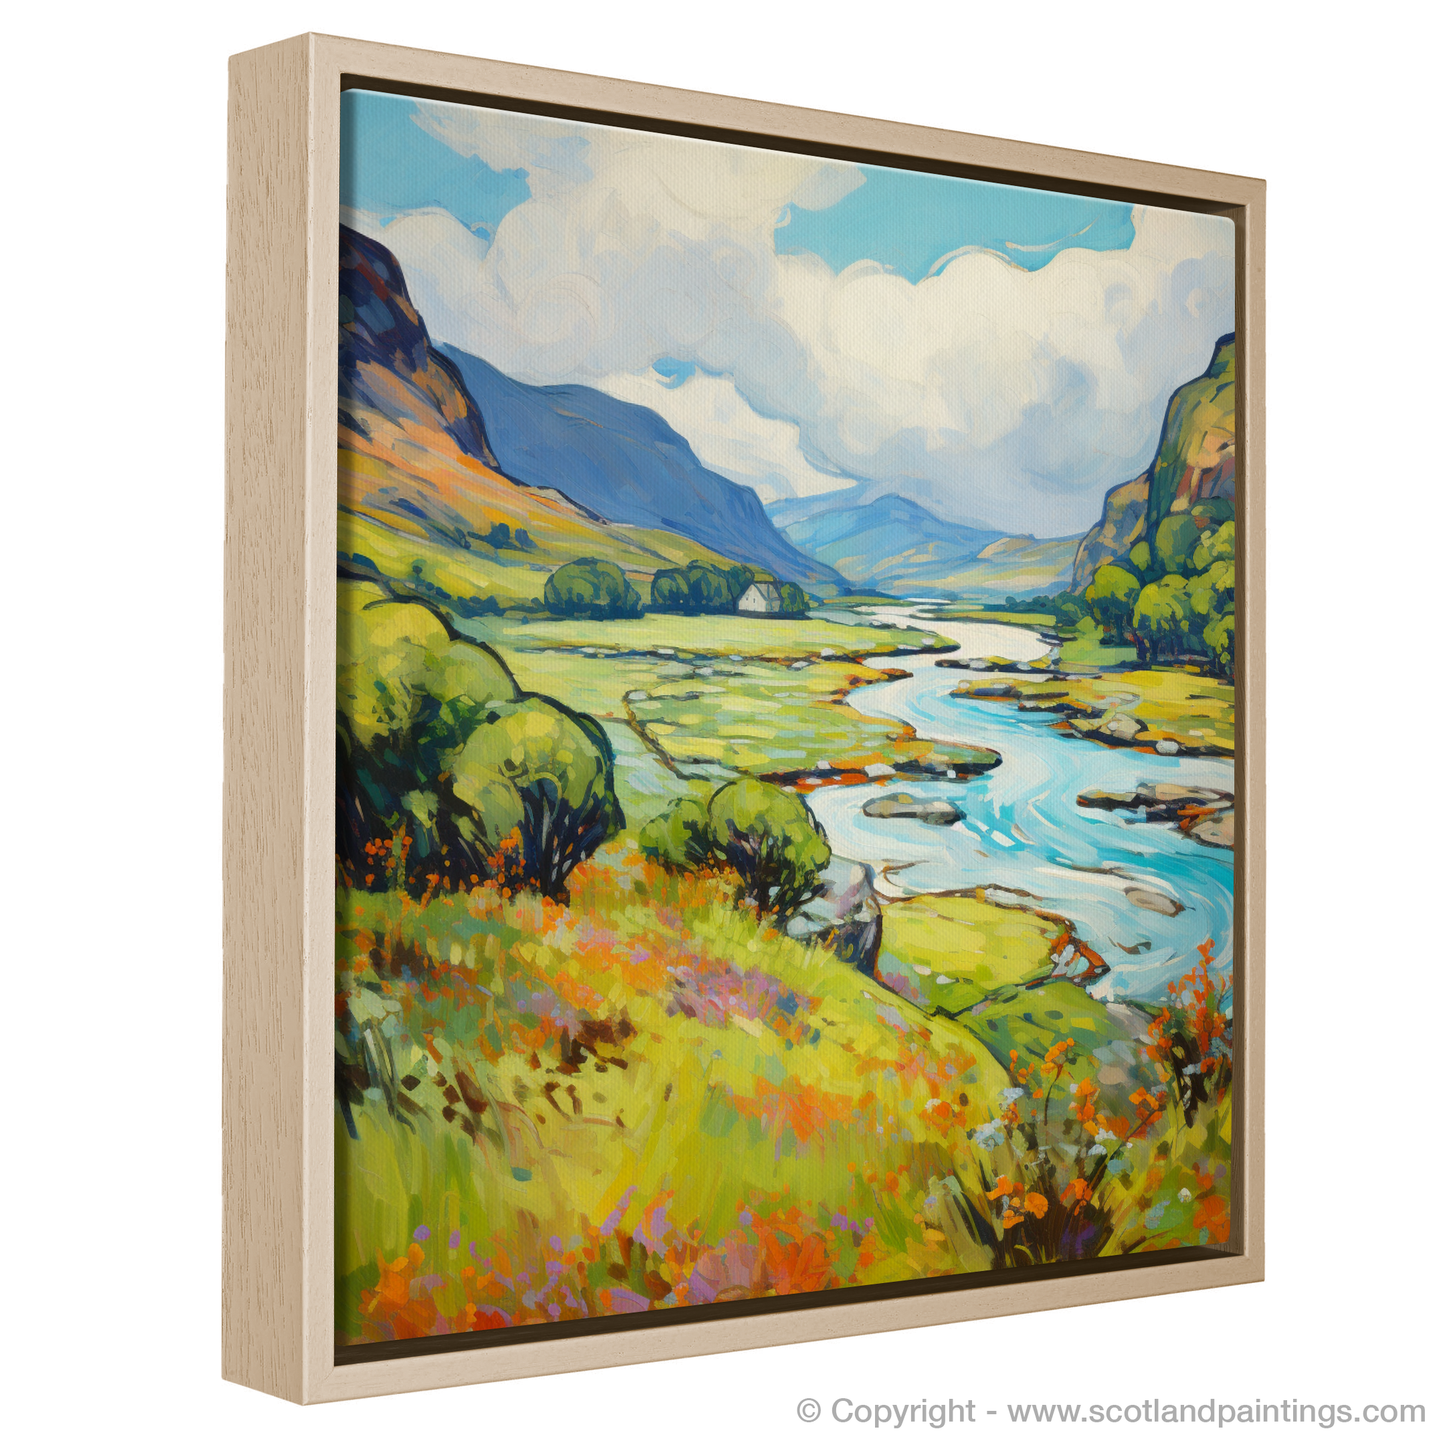 Painting and Art Print of Glen Falloch, Argyll and Bute in summer entitled "Summer Vibrance of Glen Falloch".